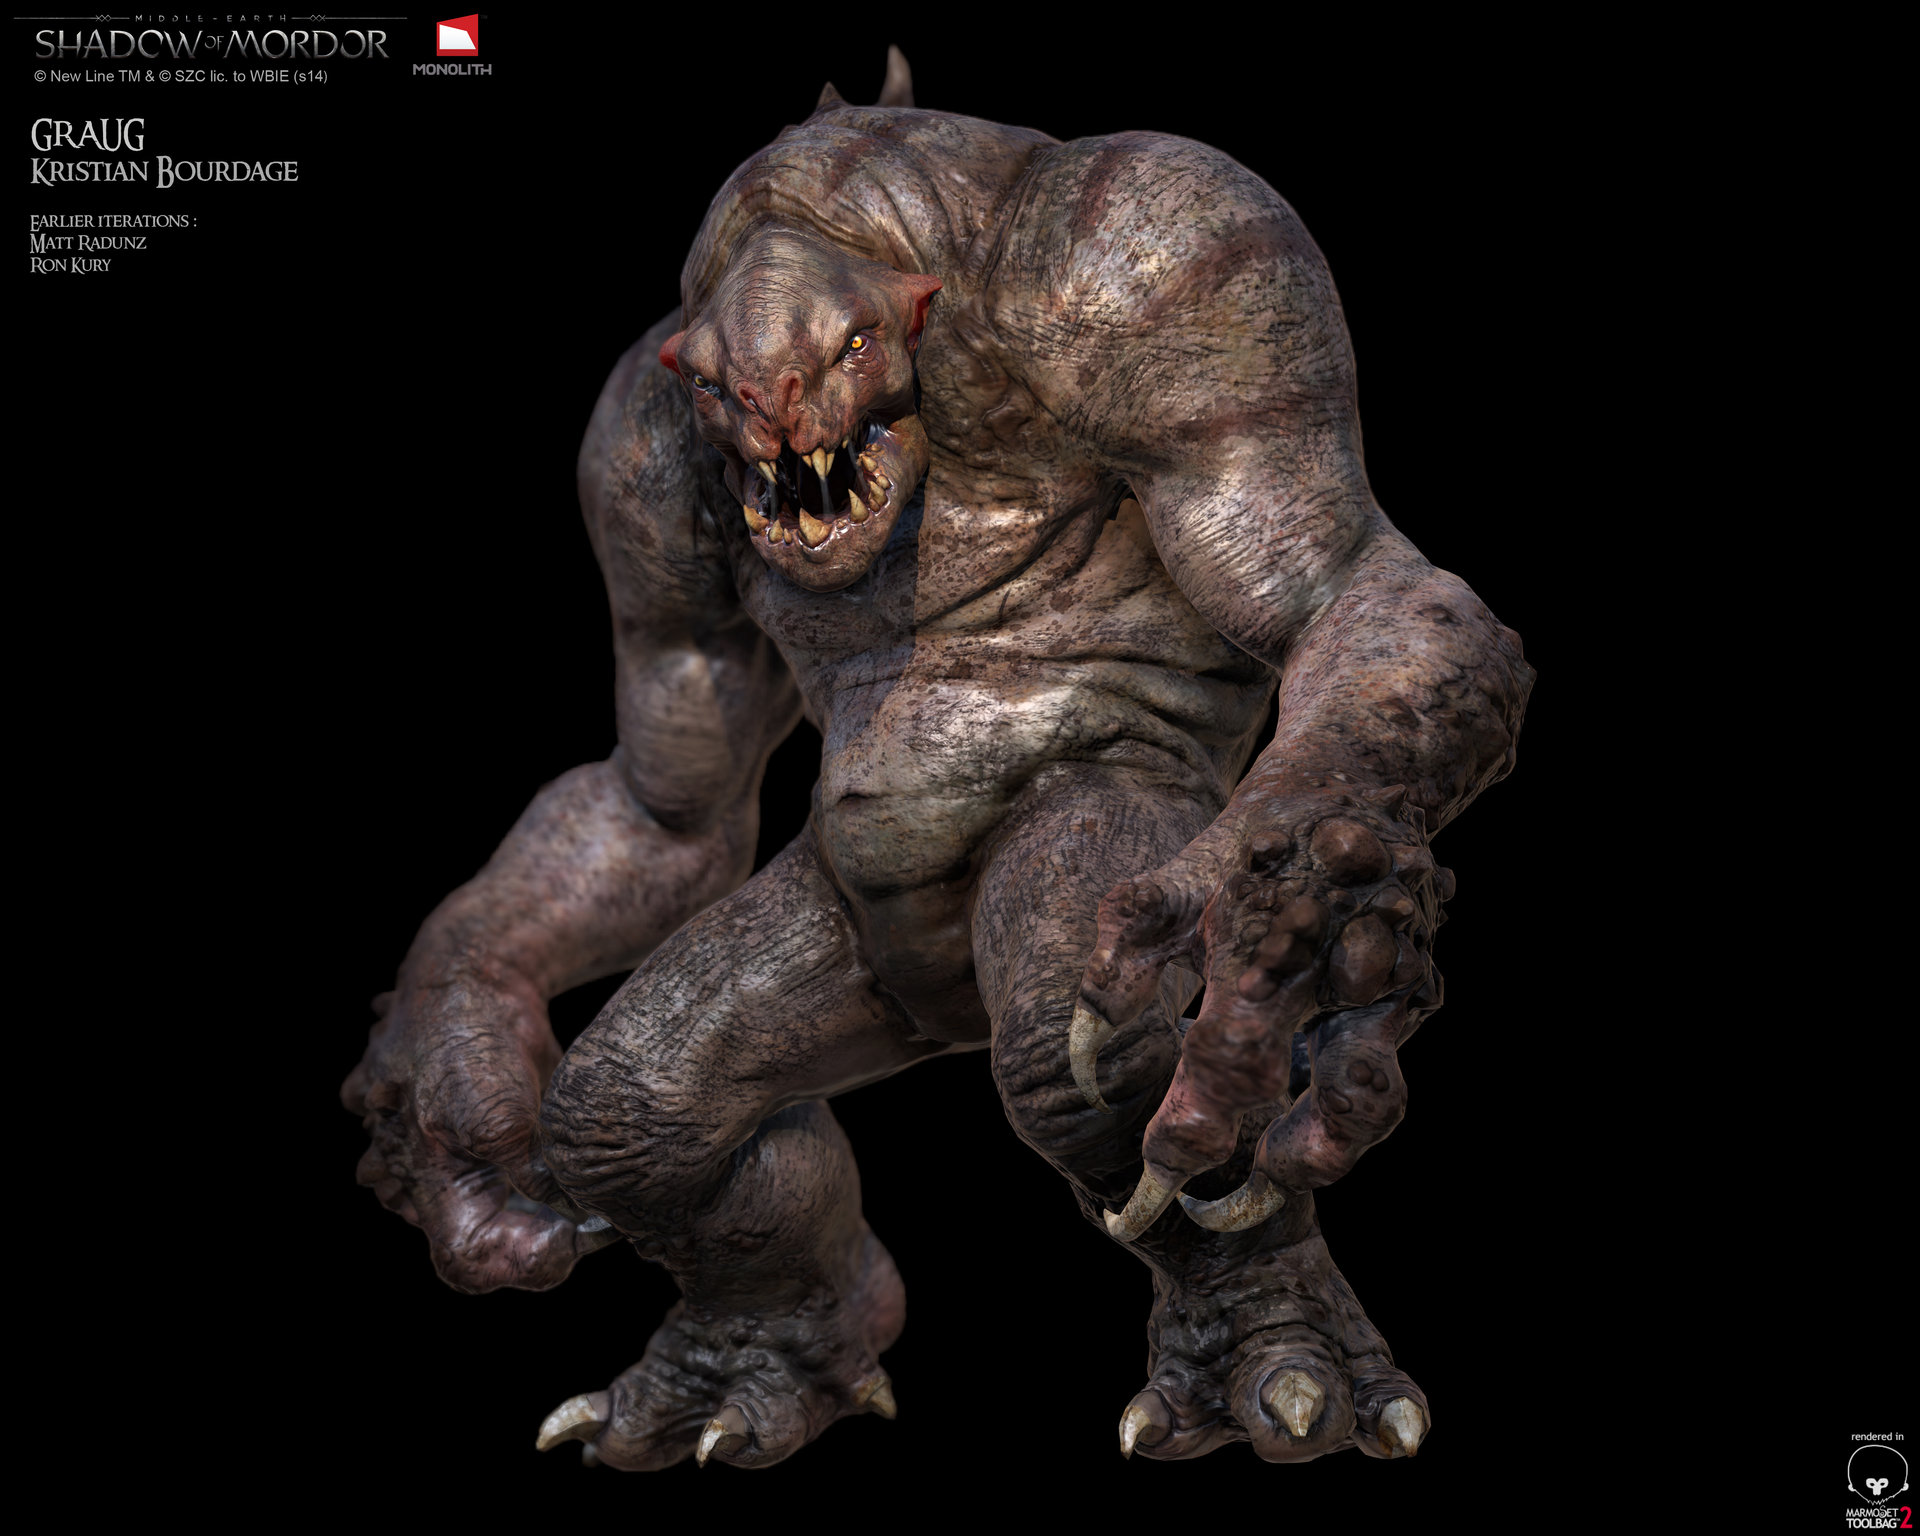 Graug are an aggressive, bestial species encountered in Middle-earth: Shado...